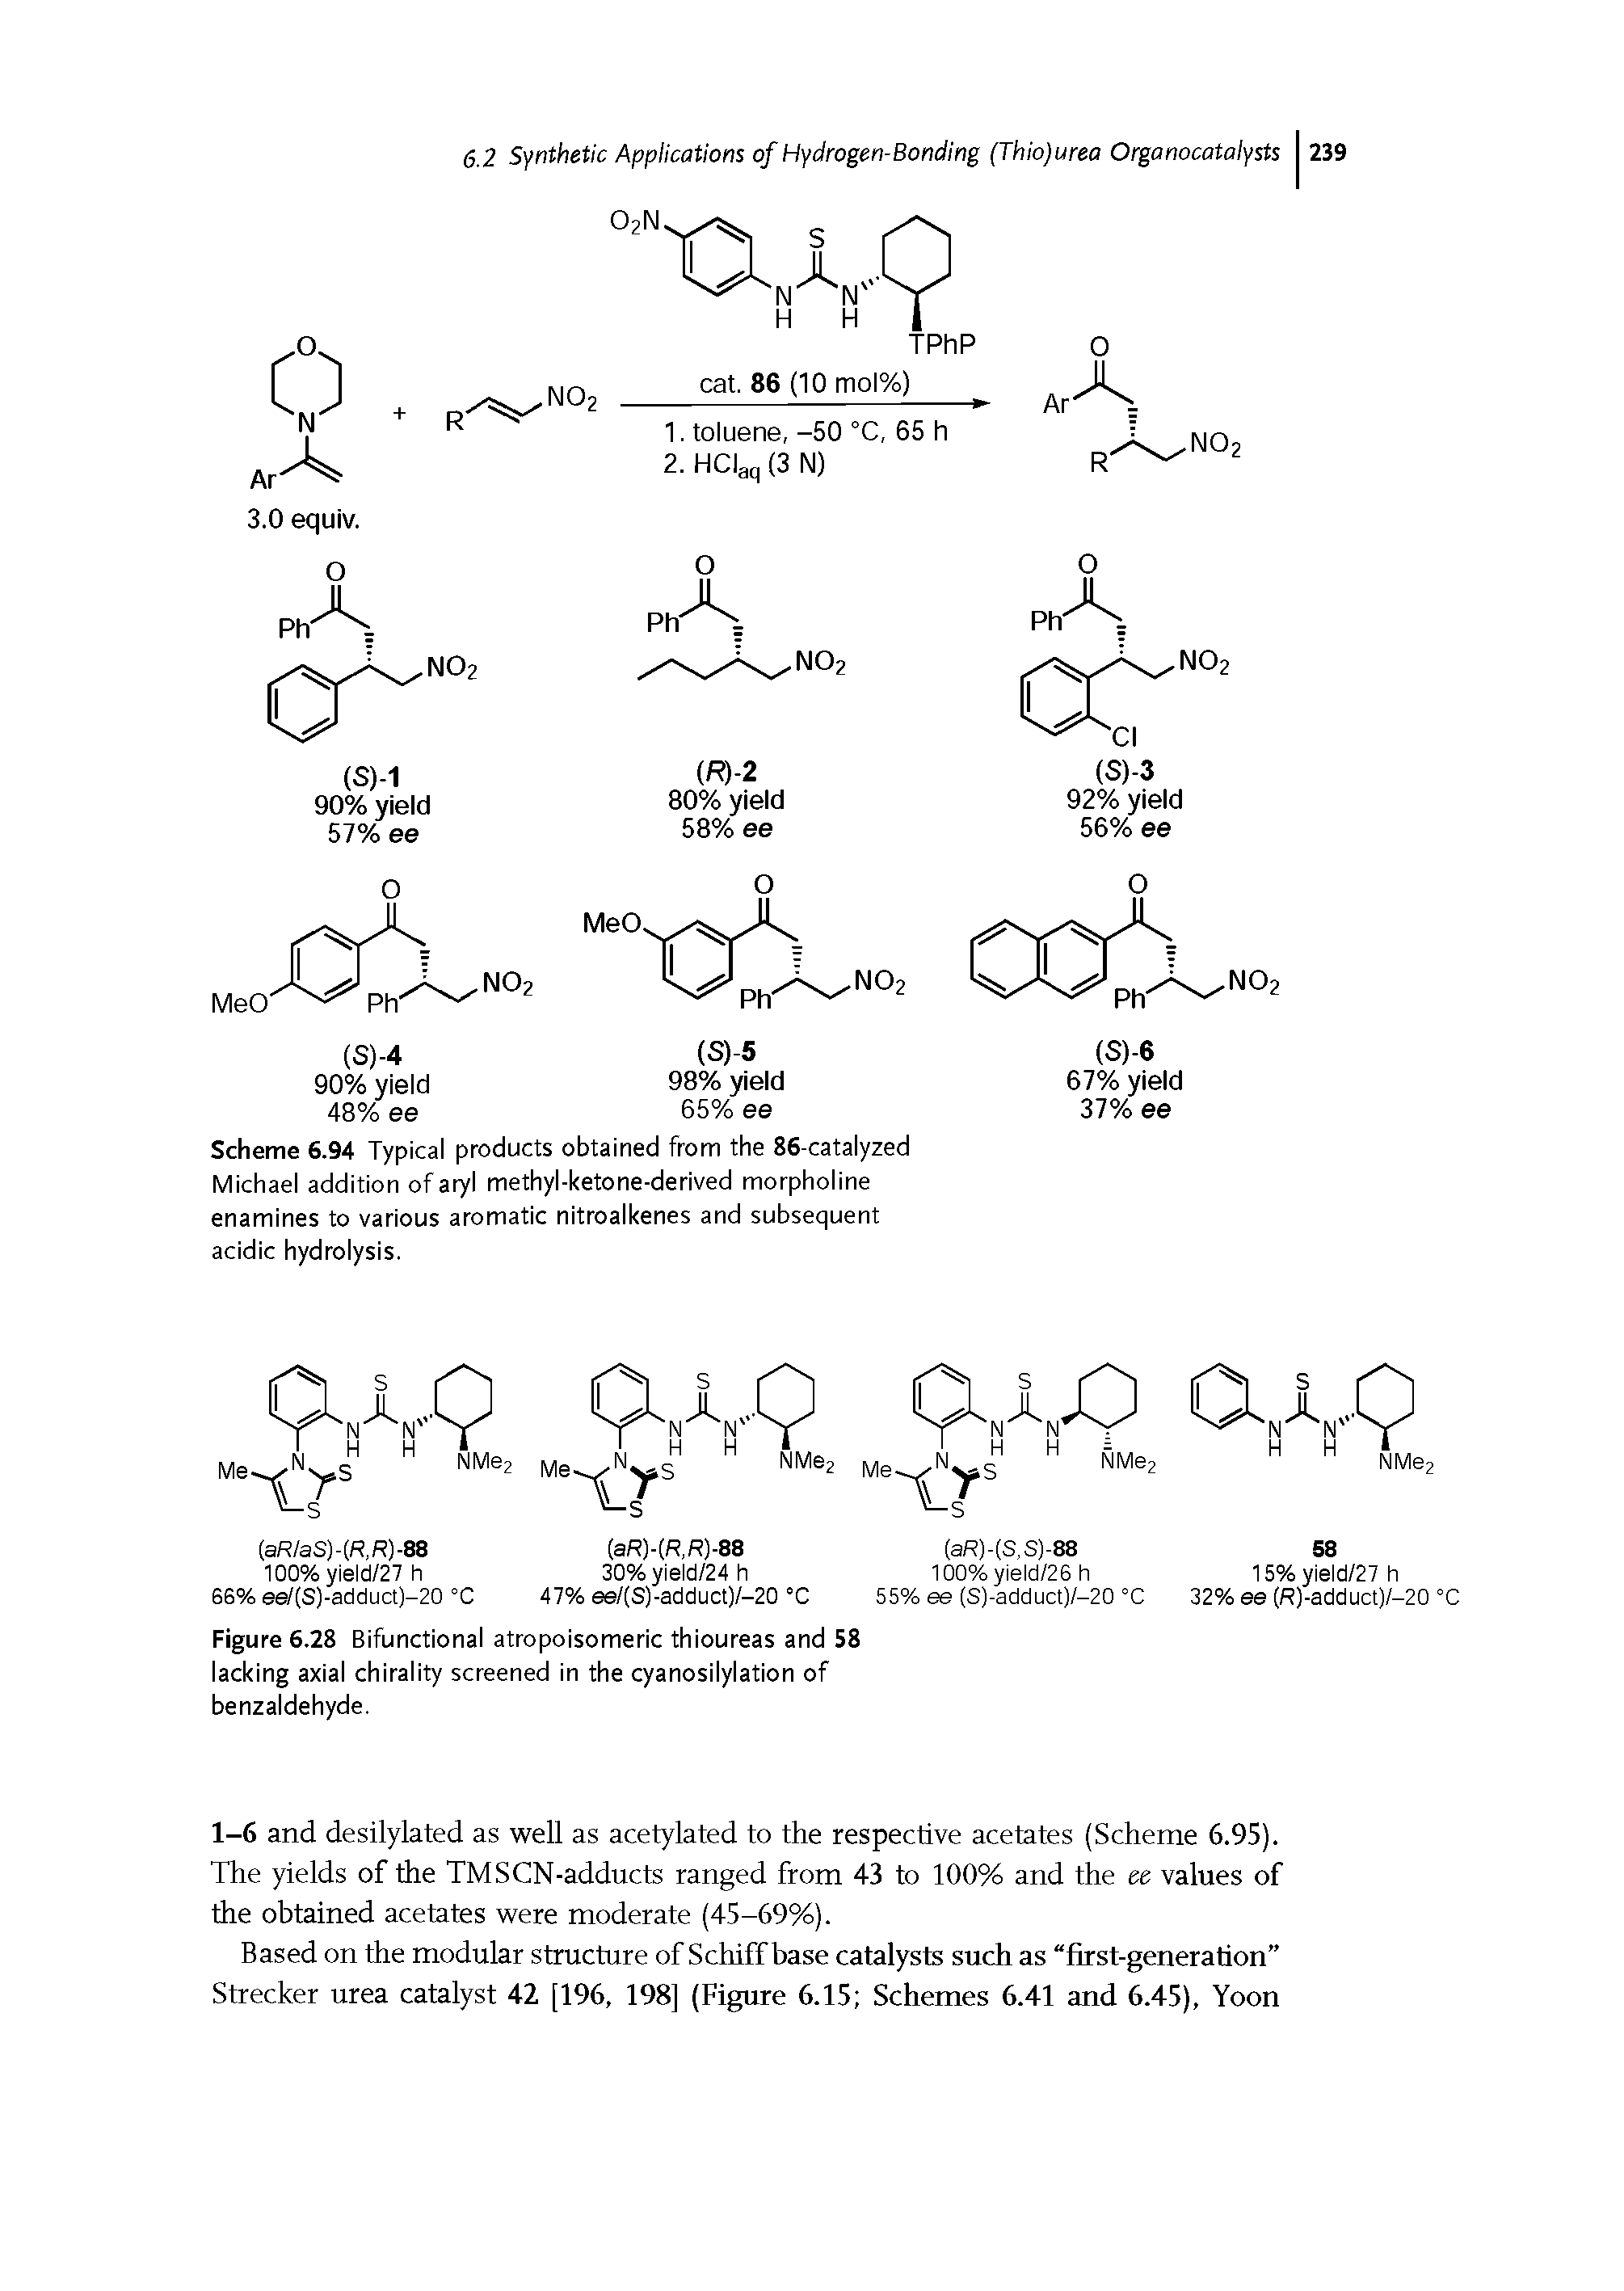 Scheme 6.94 Typical products obtained from the 86-catalyzed Michael addition of aryl methyl-ketone-derived morpholine enamines to various aromatic nitroalkenes and subsequent acidic hydrolysis.